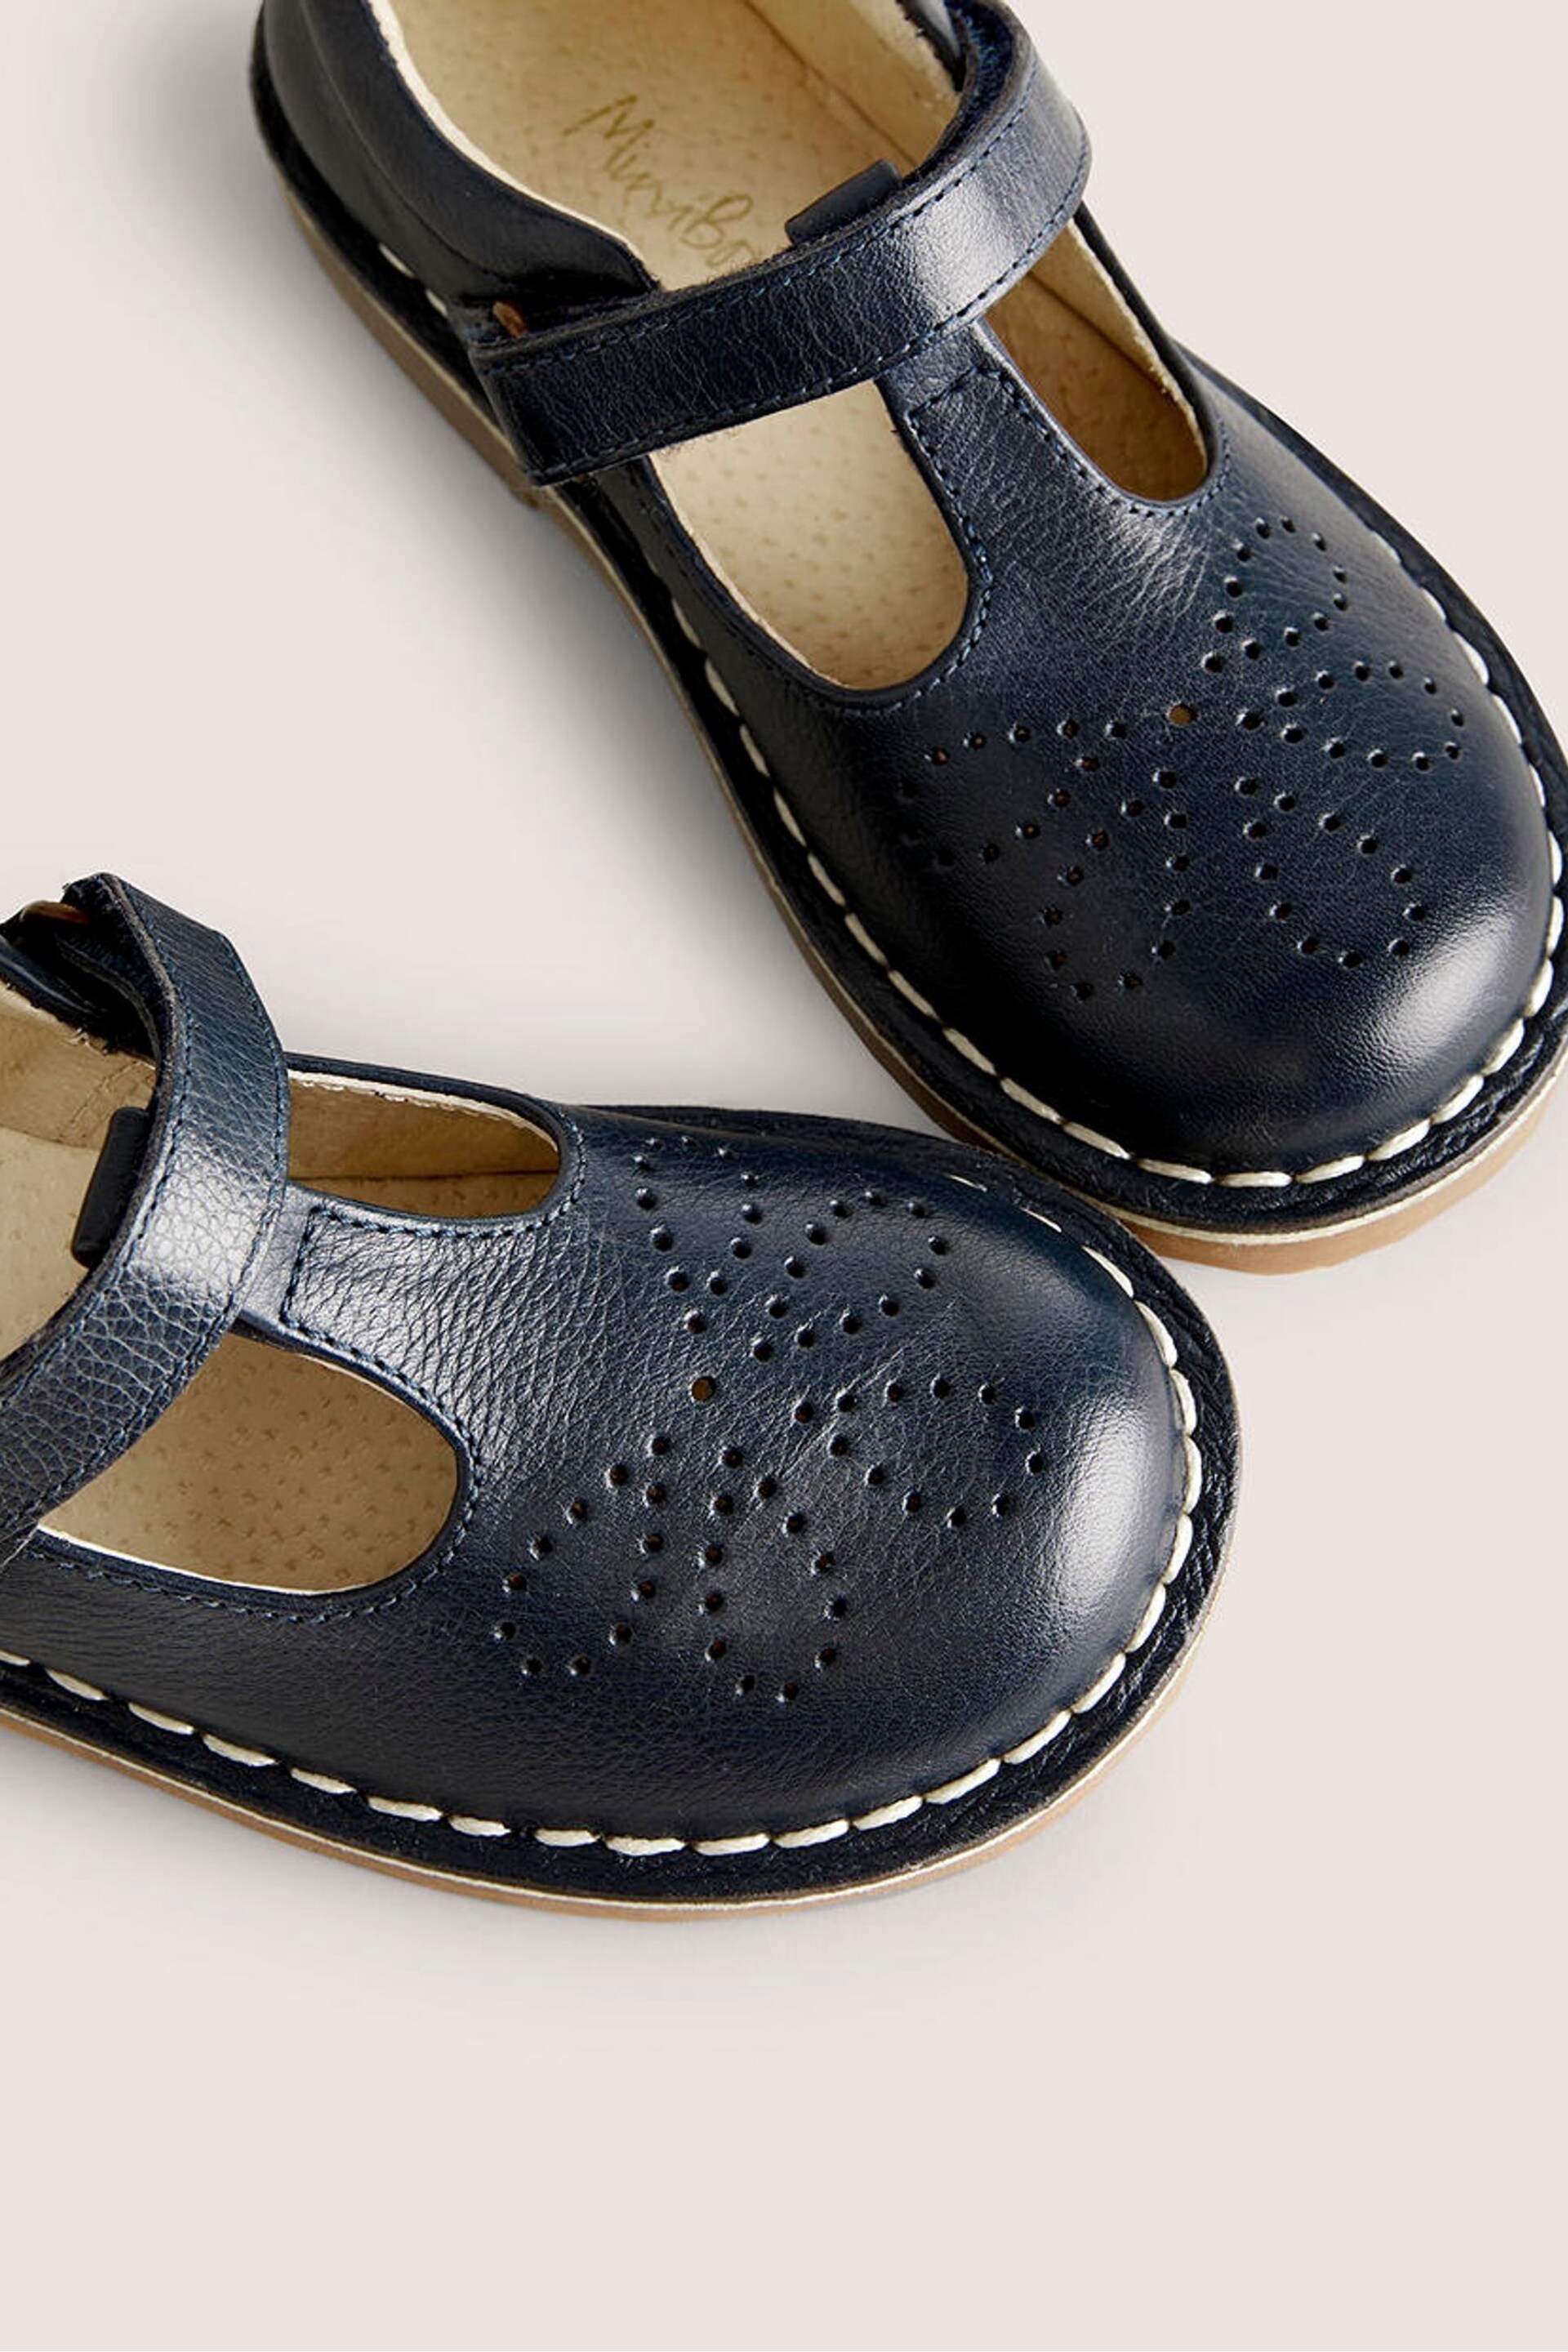 Boden Navy Leather T-Bar School Shoes - Image 3 of 3